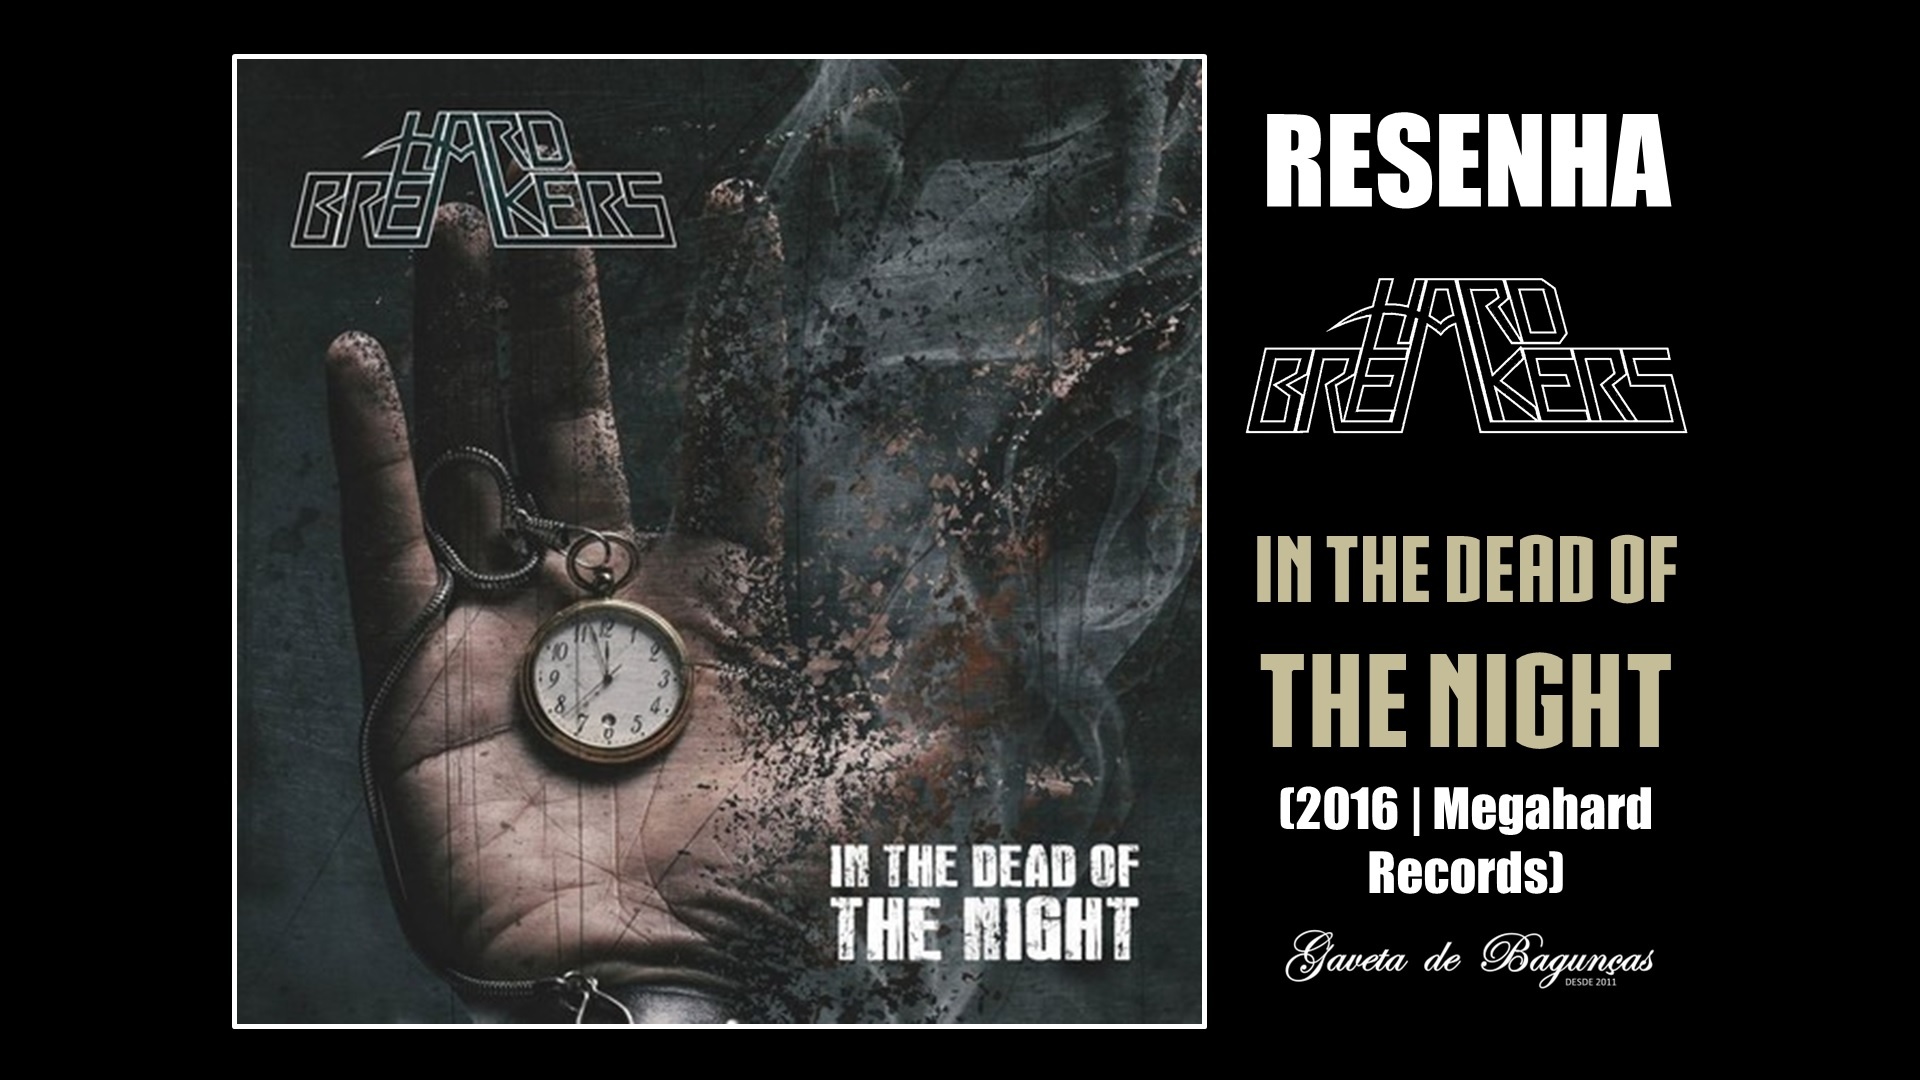 Hard Breakers - In The Dead of The Night (2016, Megahard Records) Resenha Review